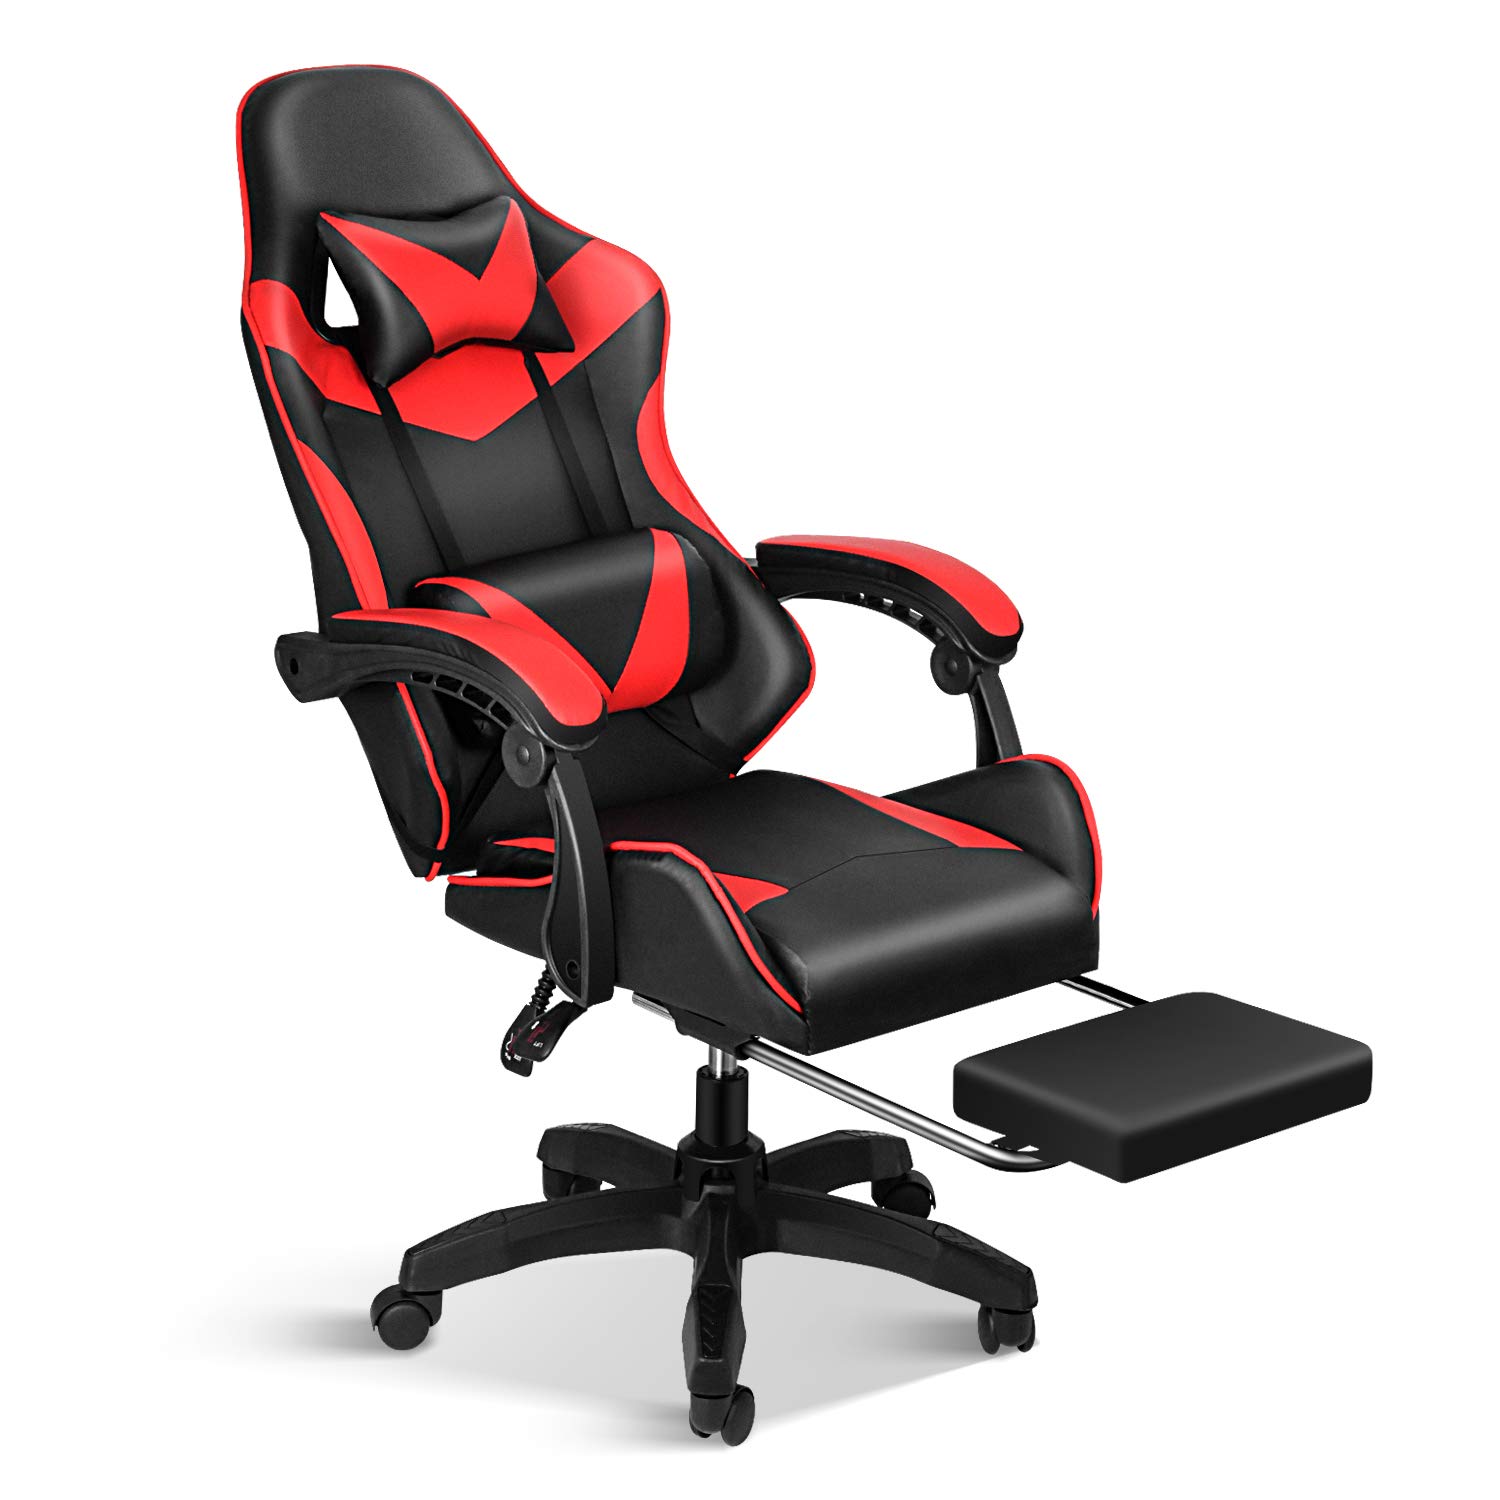 YSSOA FNGAMECHAIR01 Gaming Office High Back Computer Ergonomic Adjustable Swivel Chair with Headrest and Lumbar Support, with footrest, Red/Black